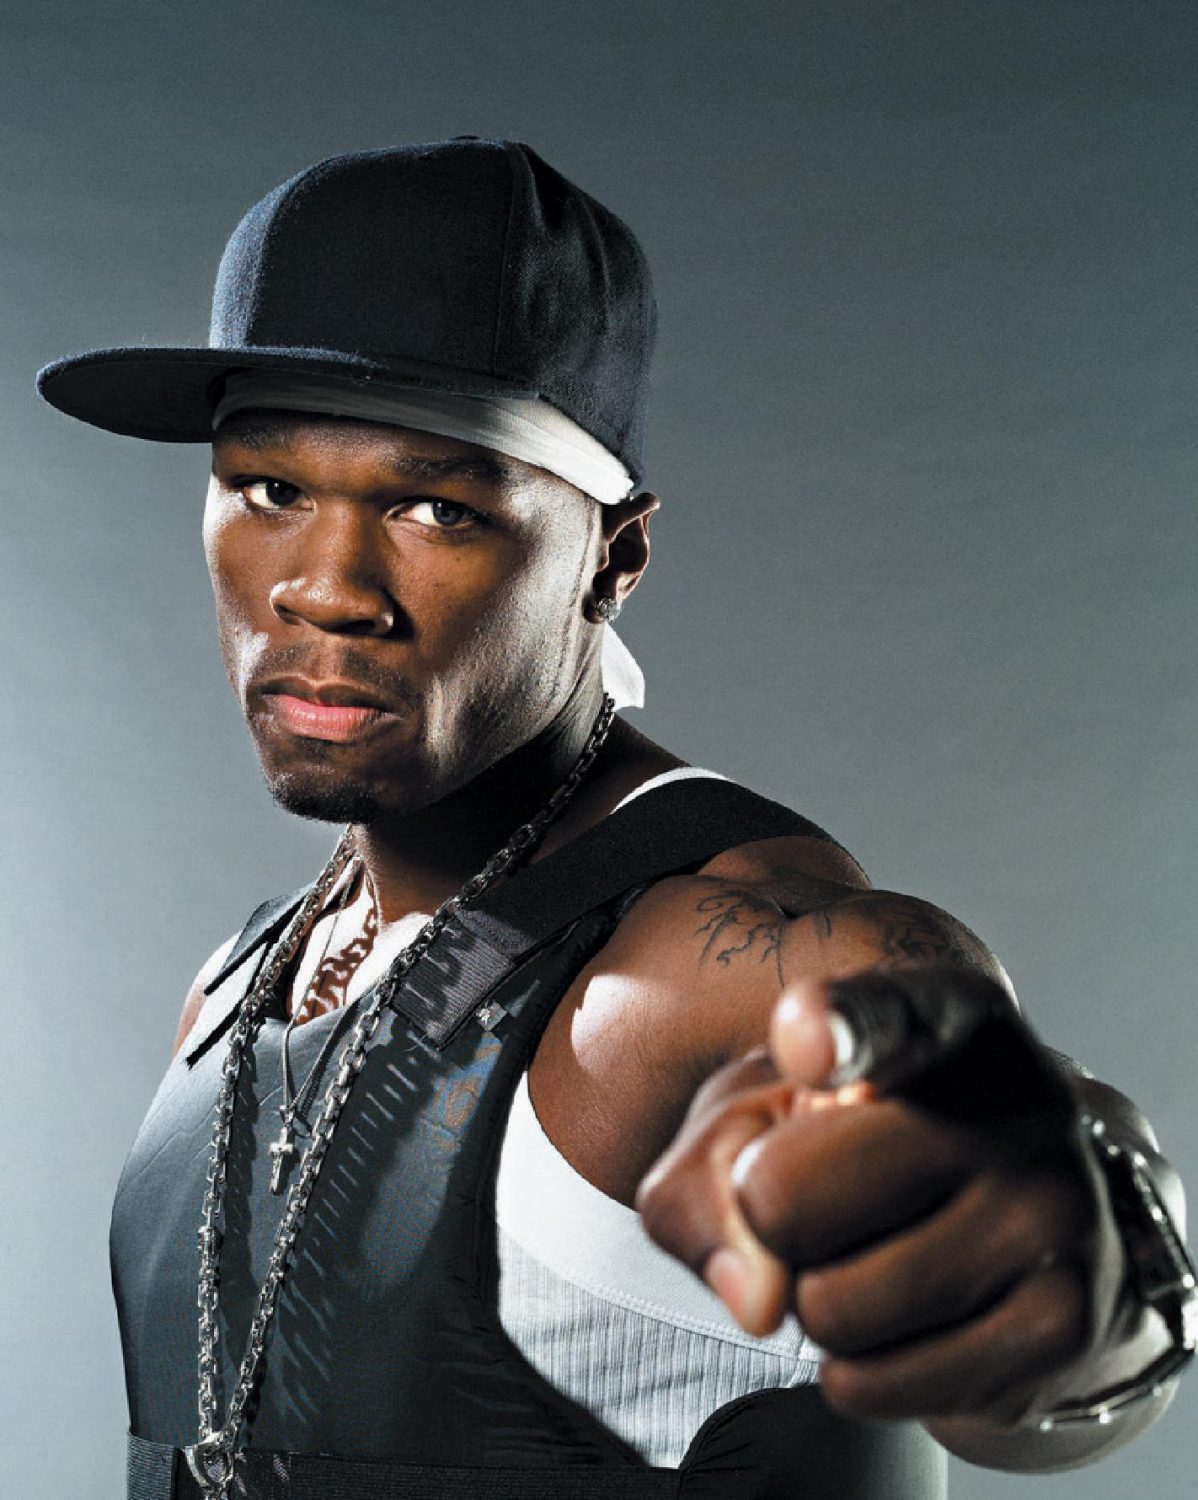 50 Cent Says ‘Vote For Trump’ In Light Of Biden’s Tax Plan: ‘IM OUT’